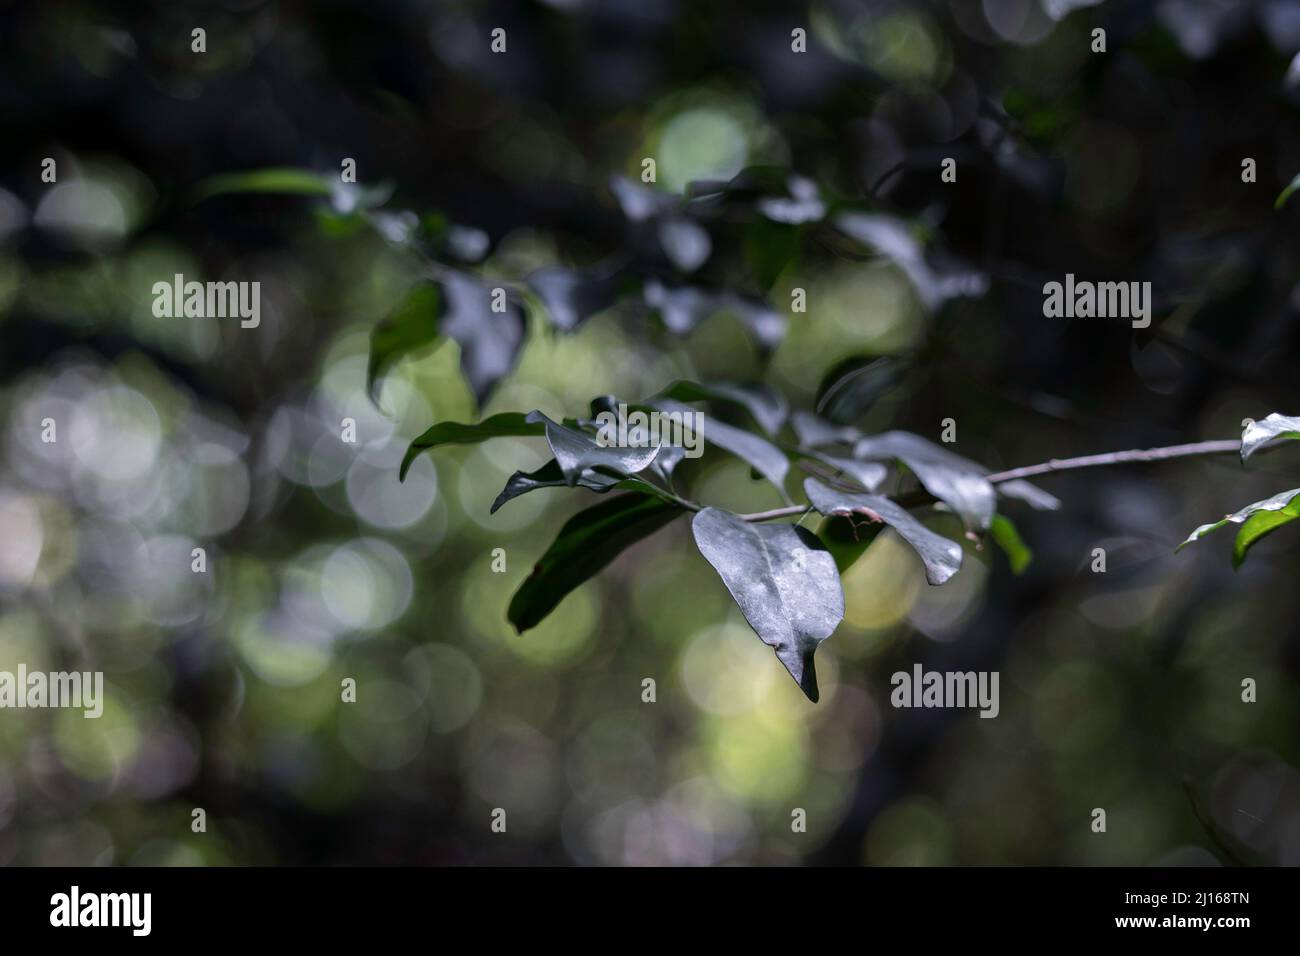 Nature details of green leaves growing on a tree in the forest with bokeh background Stock Photo